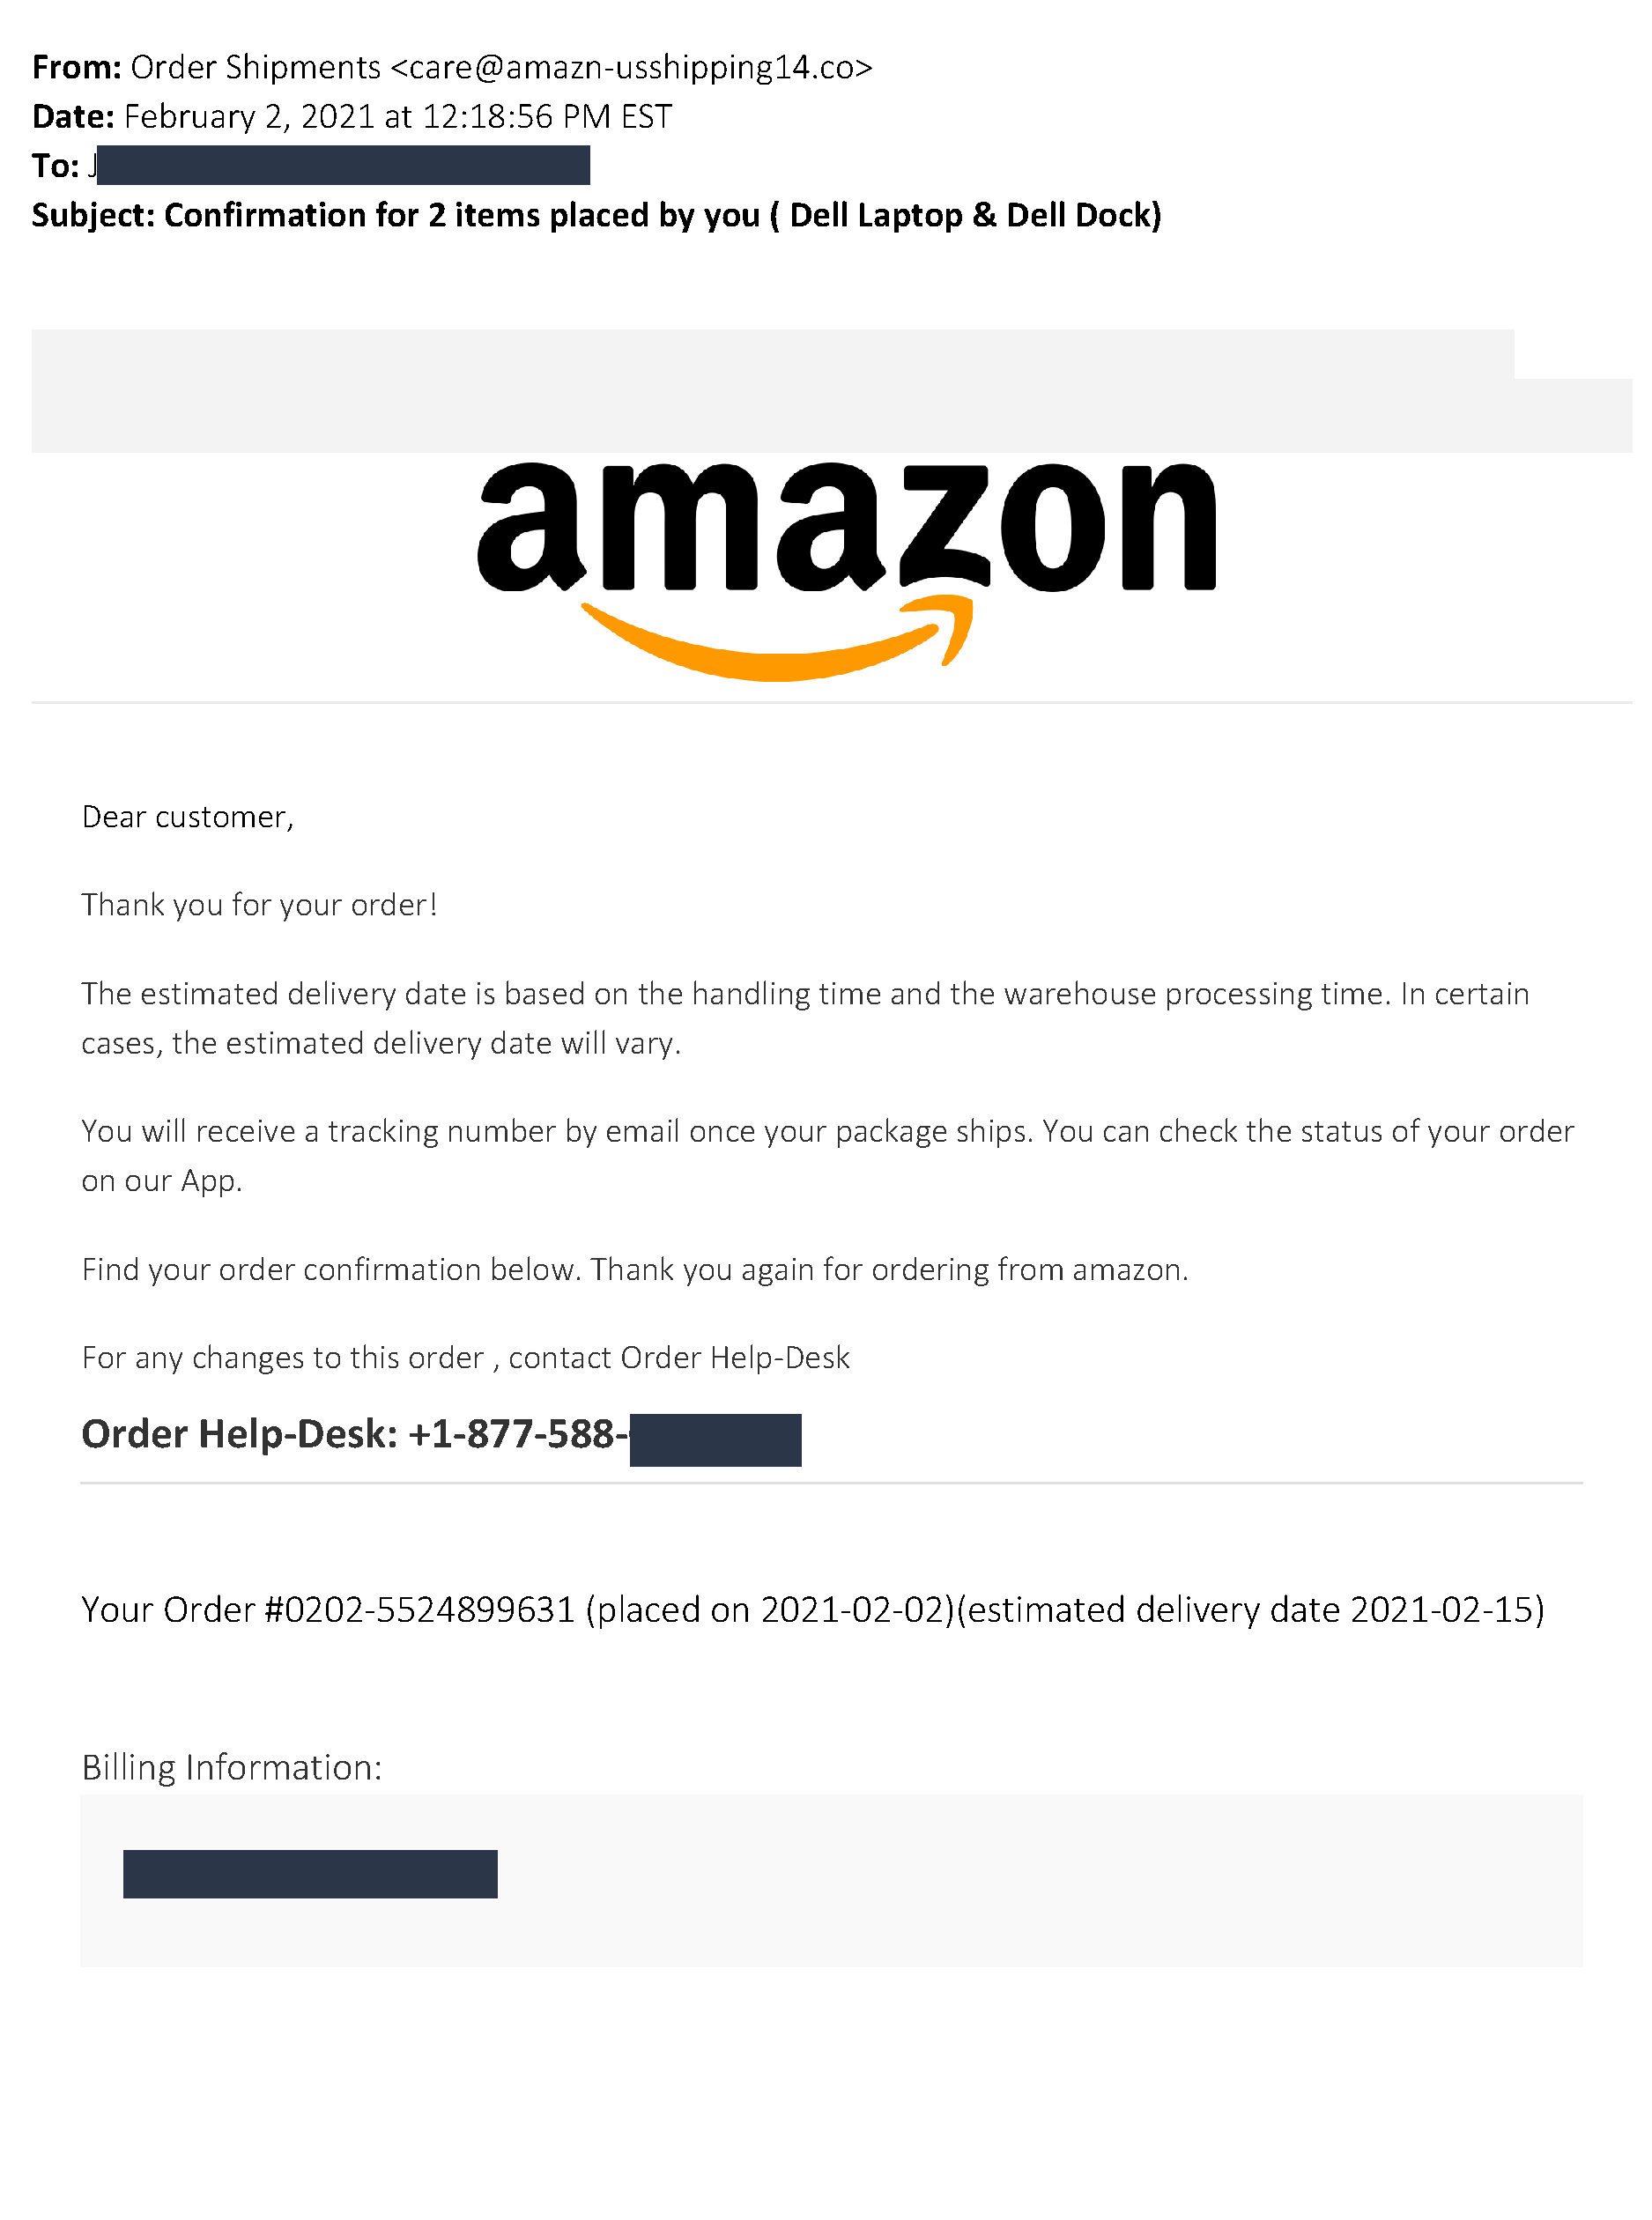 Confirmation for order placed by you (Amazon) Security RIT